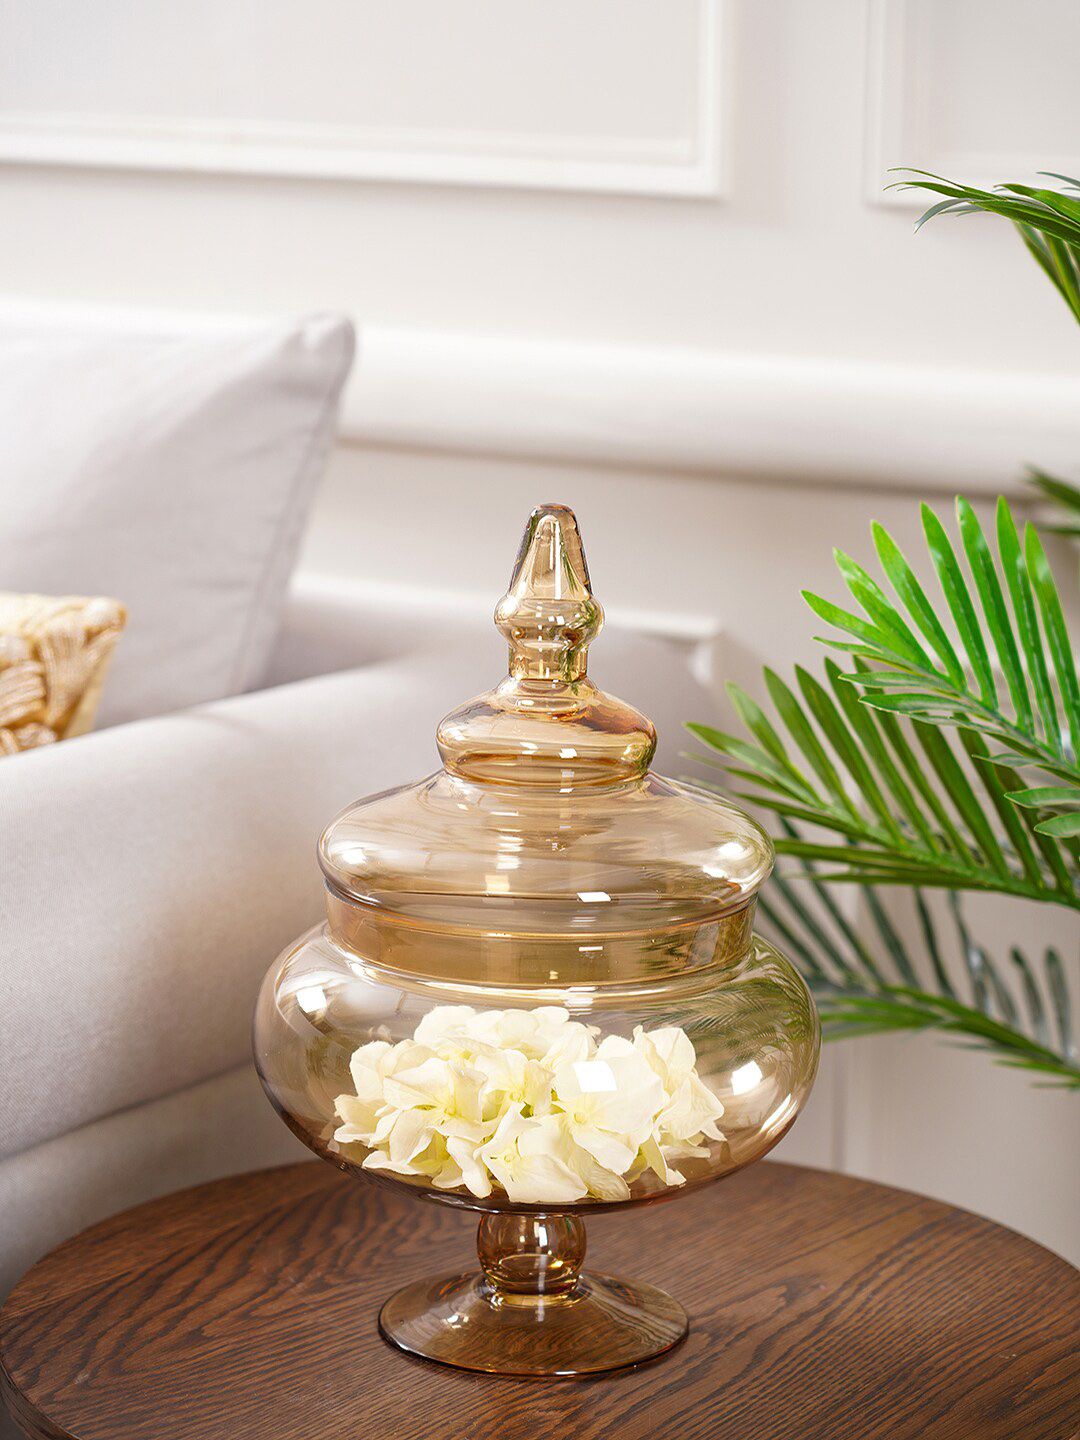 Pure Home and Living Gold-Toned Solid Glass Candy Jar Price in India